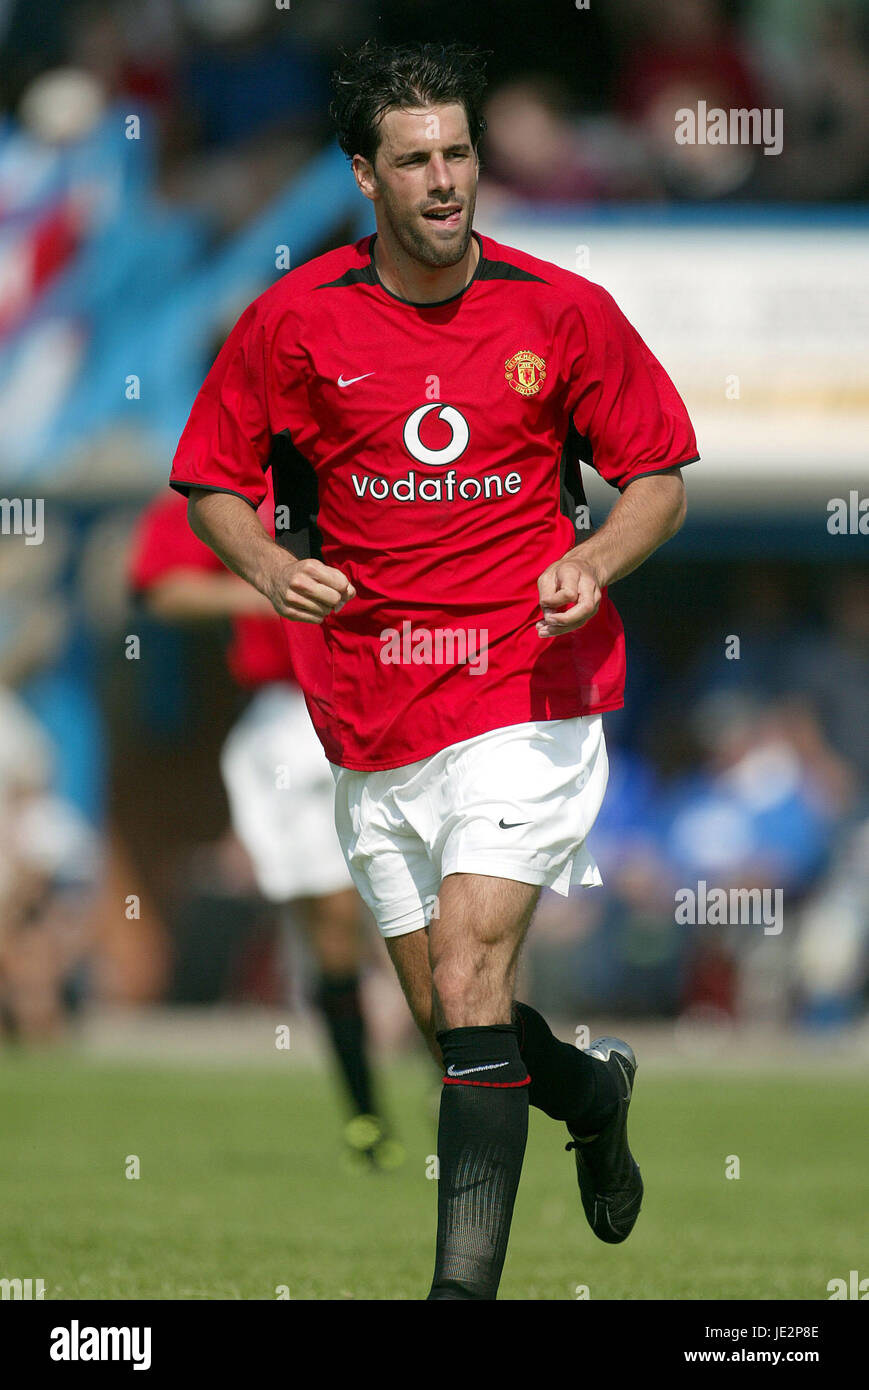 RUUD VAN NISTELROOY MANCHESTER UNITED FC SALTERGATE CHESTERFIELD ENGLAND 26 July 2002 Stock Photo